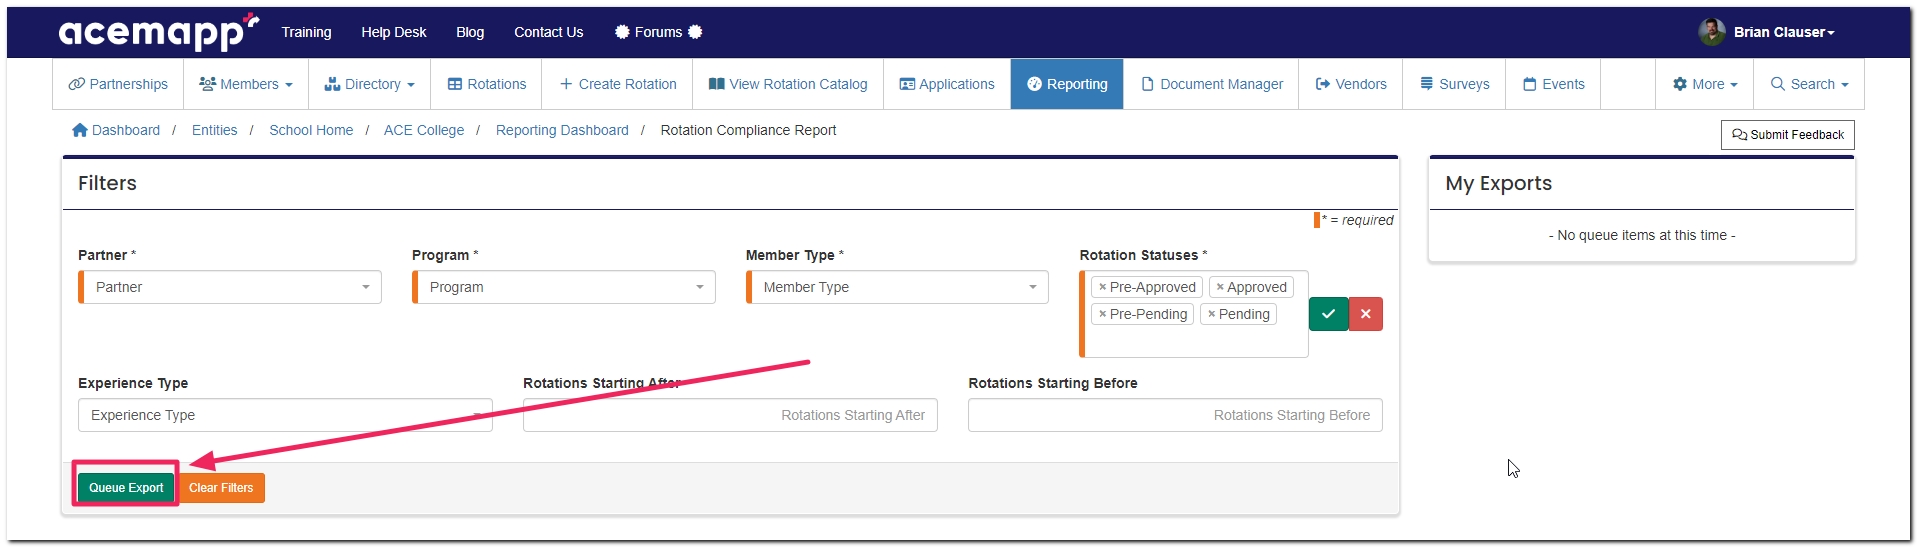 Rotation Compliance report filters panel highlighting Queue Export button